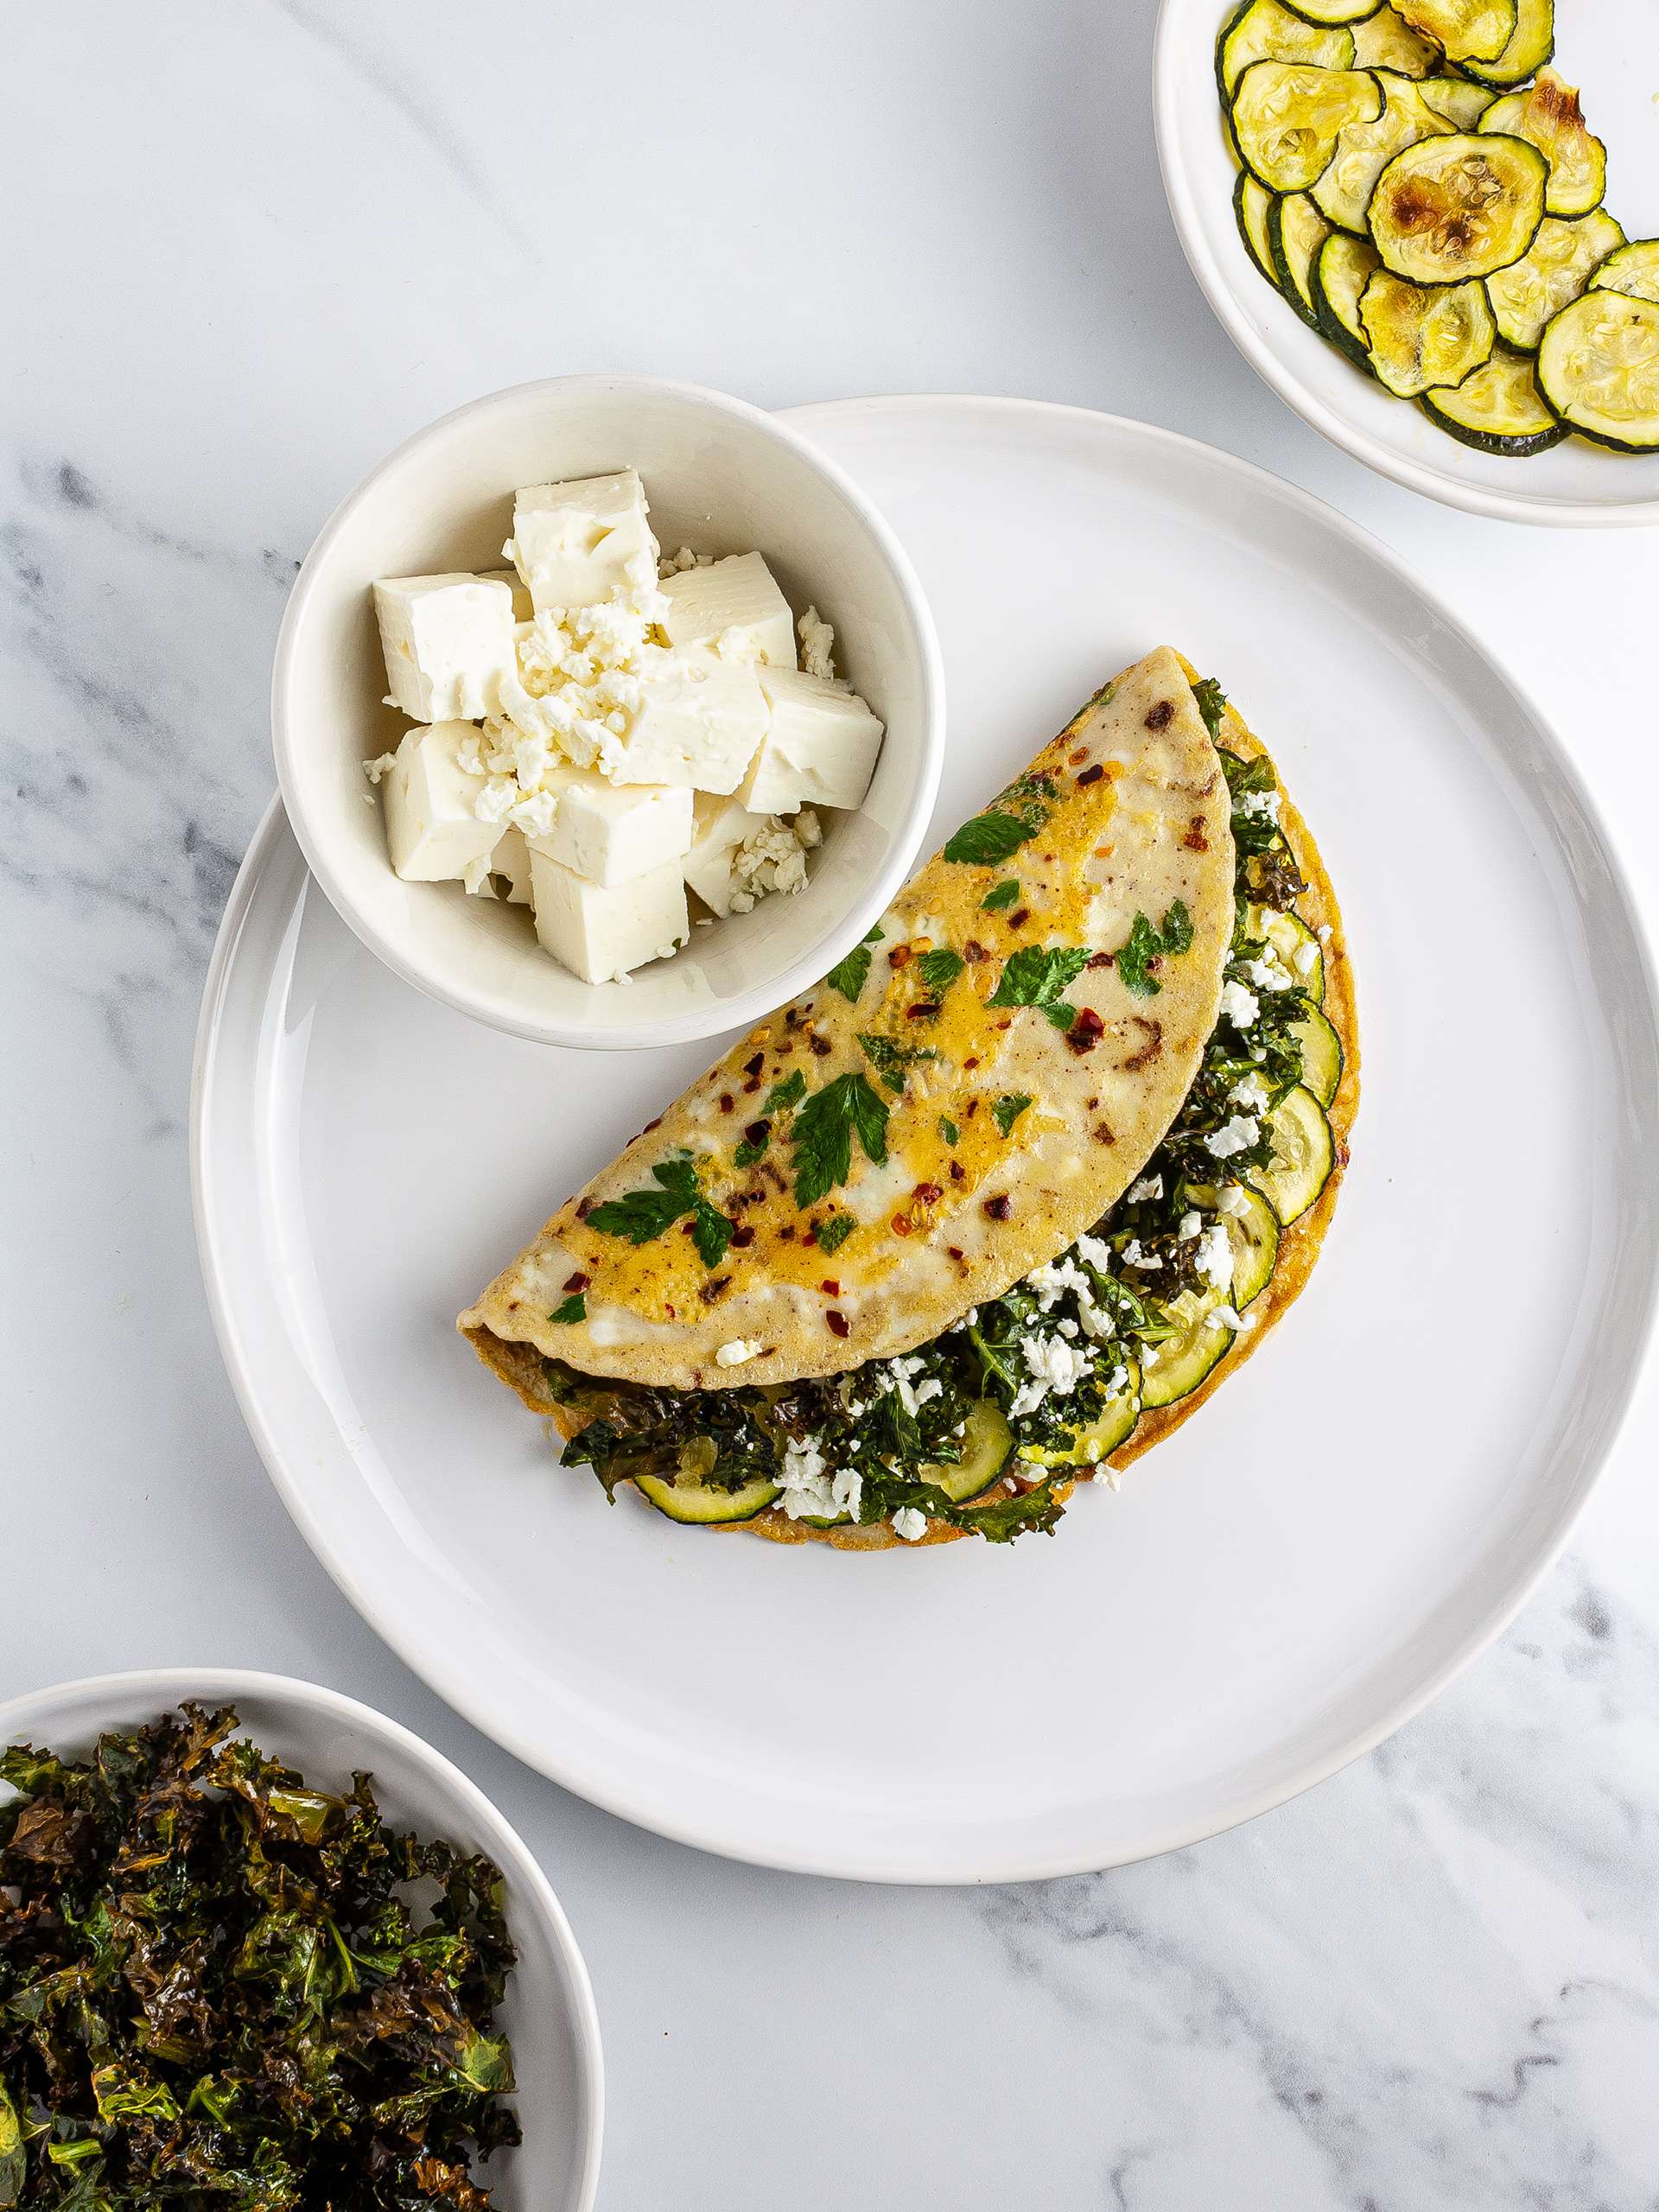 Omelette stuffed with kale, courgettes, and feta.